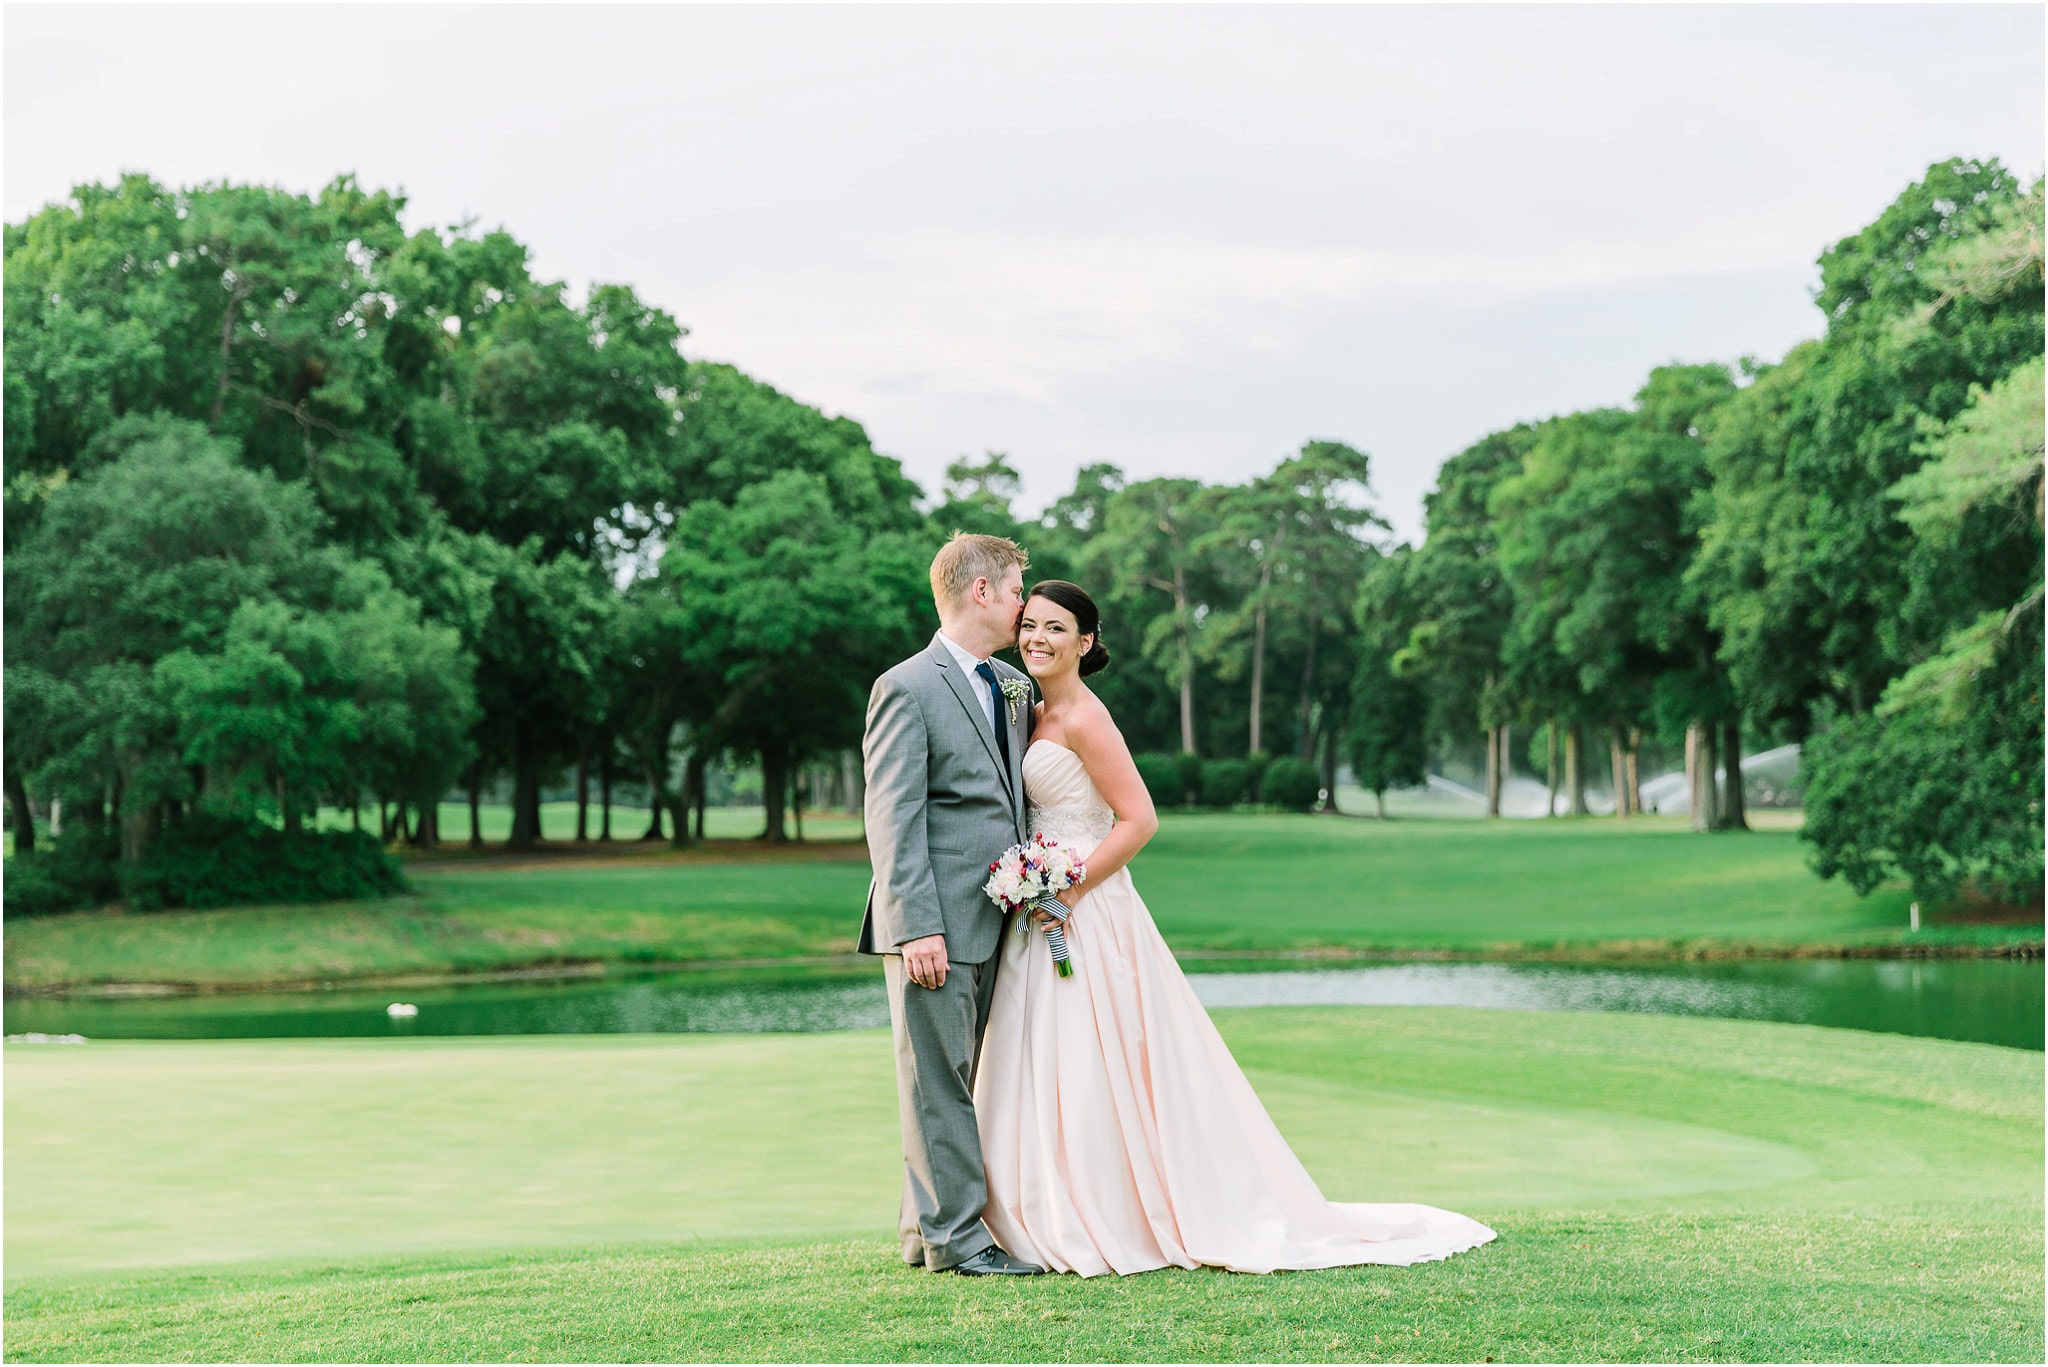 The groom gently kissing his bride on the green